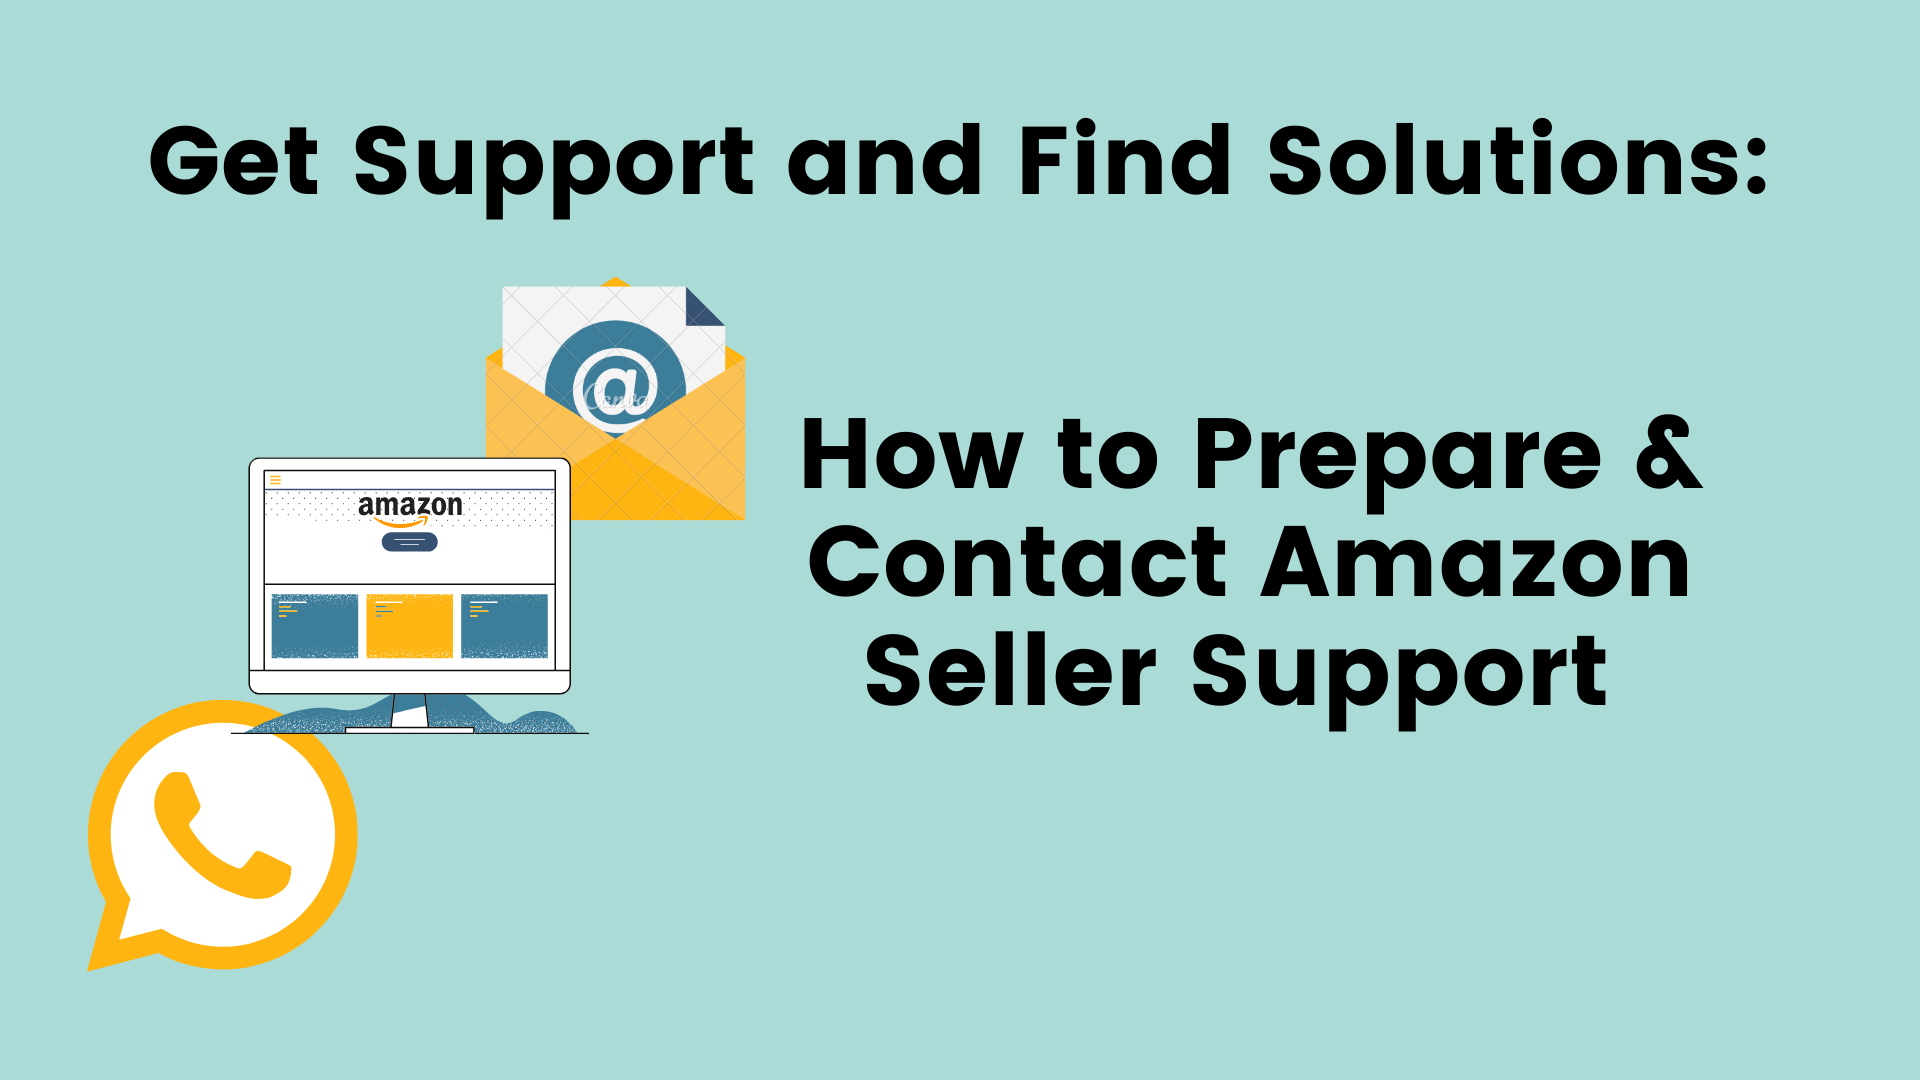 Amazon seller account suspended?Consult Smart Sellers Help to restore it.